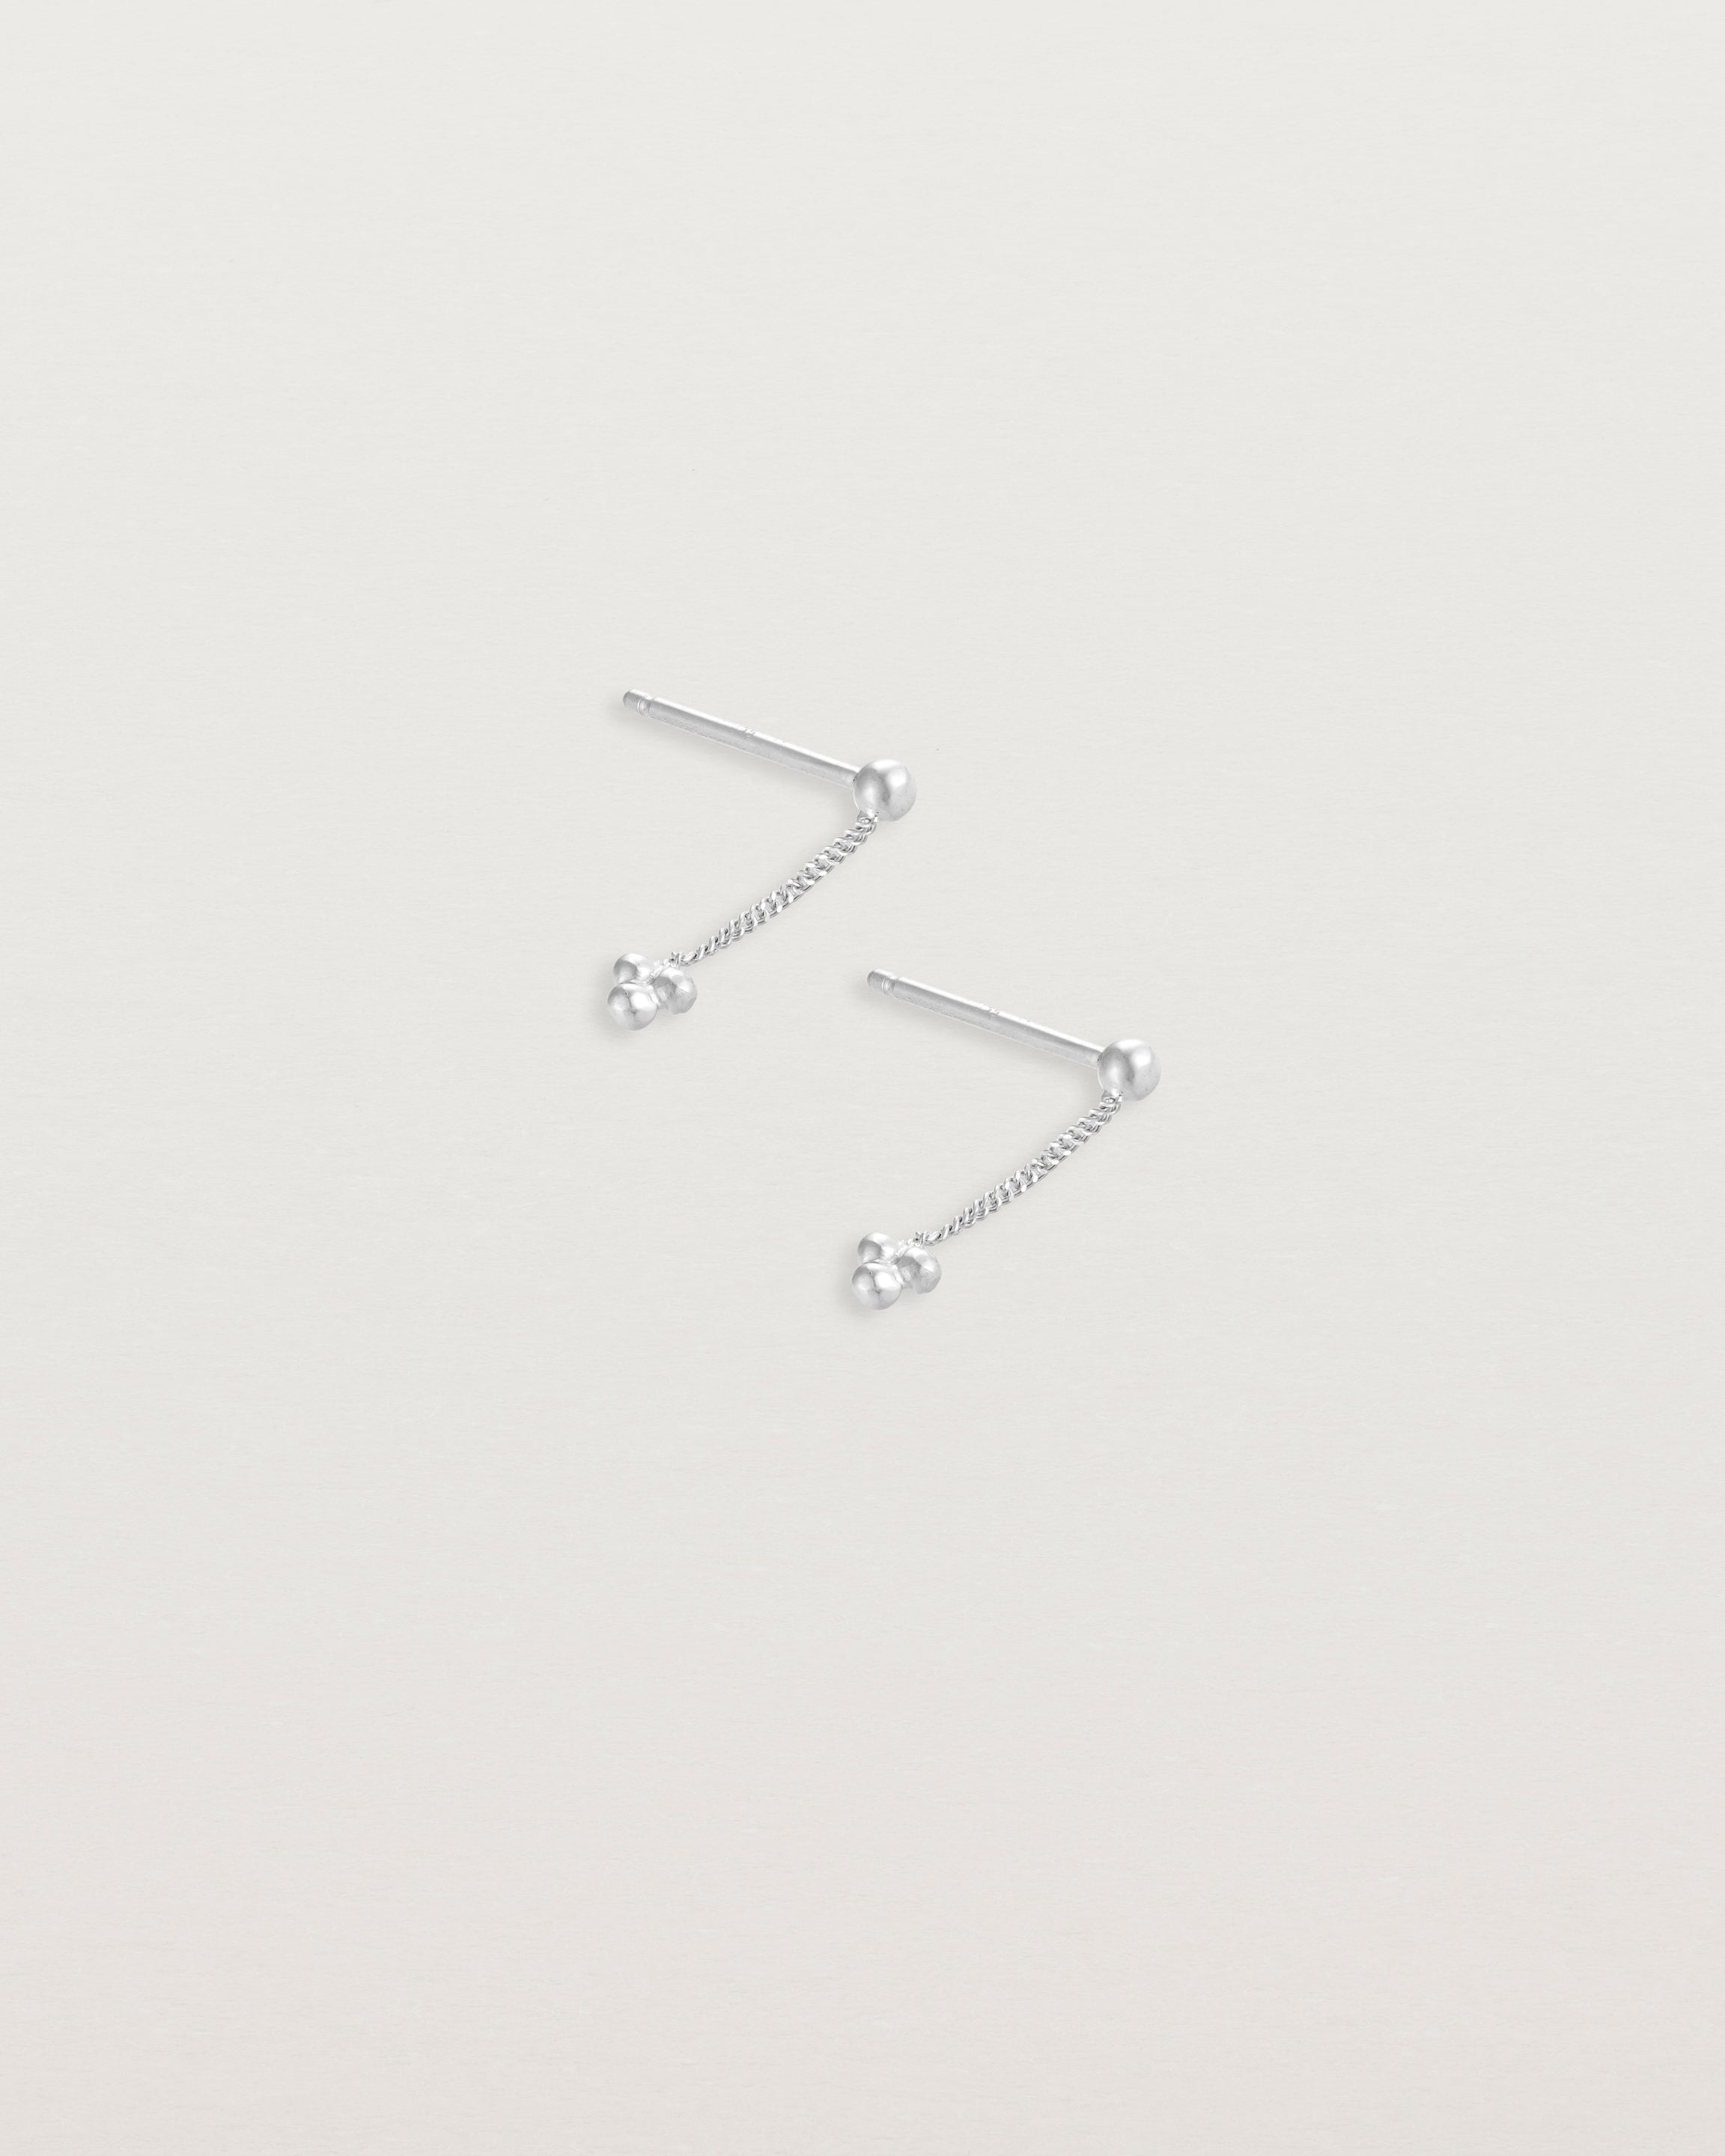 A pair of Tellue Drop Studs in Sterling Silver.